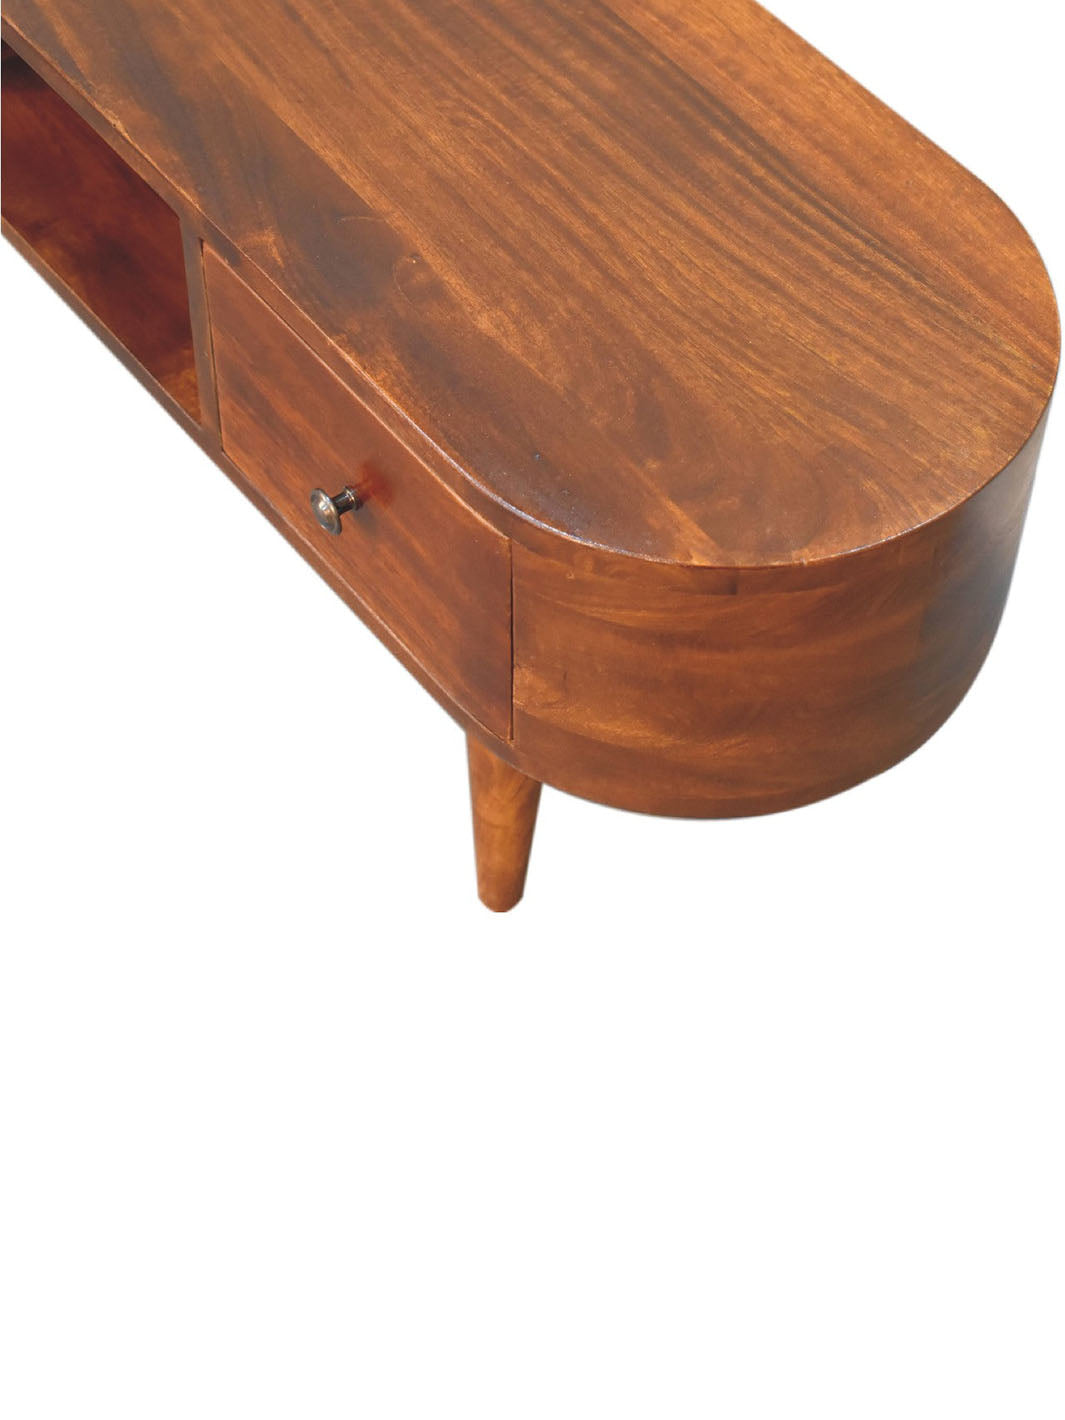 Chestnut Rounded Coffee Table with Open Slot Artisan Furniture  IN3315-5